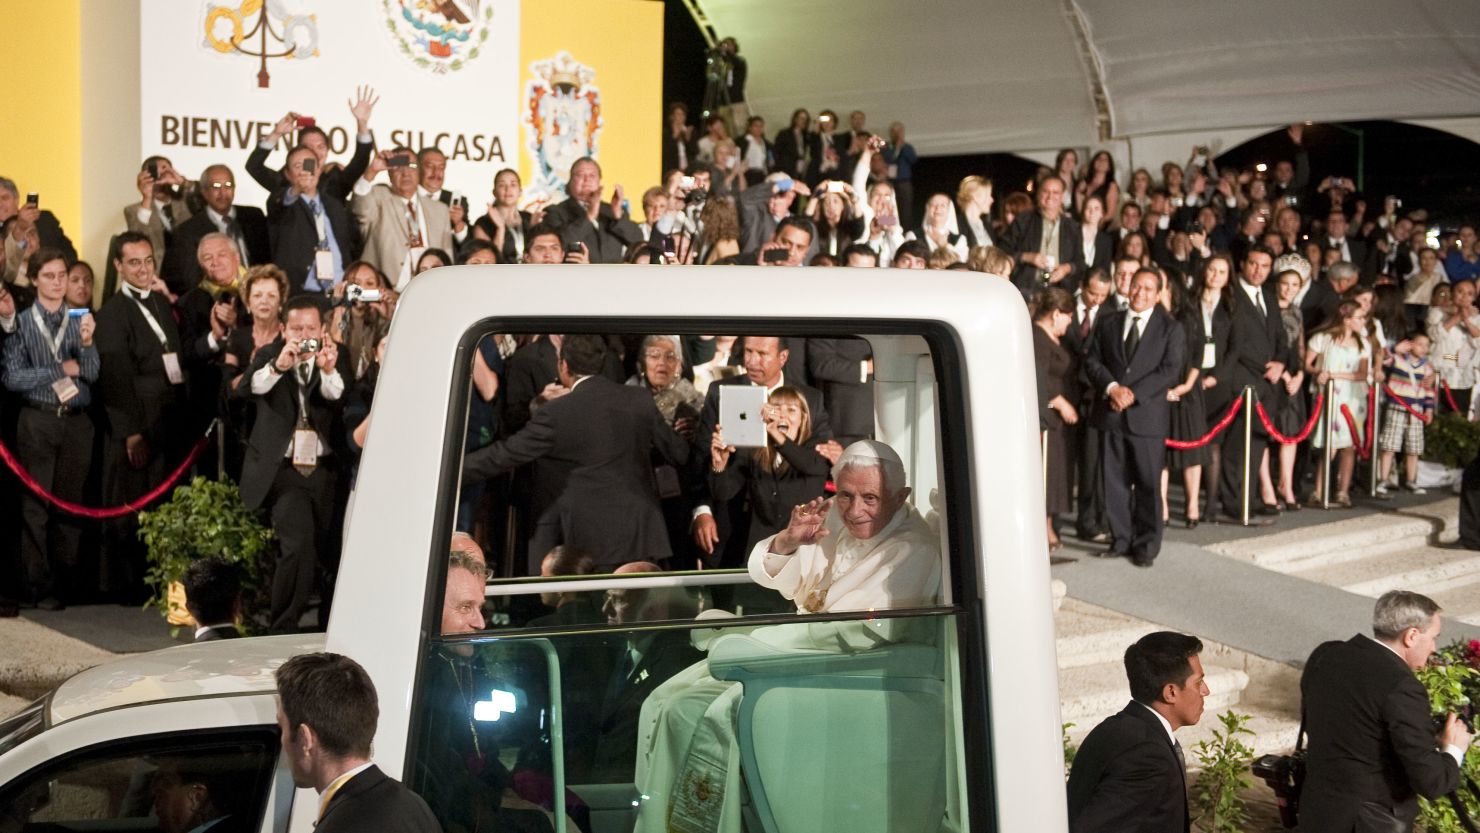 Pope Benedict XVI after a ceremony in which he was given the keys to the city in Guanajuato, Mexico, on March 24, 2012. 